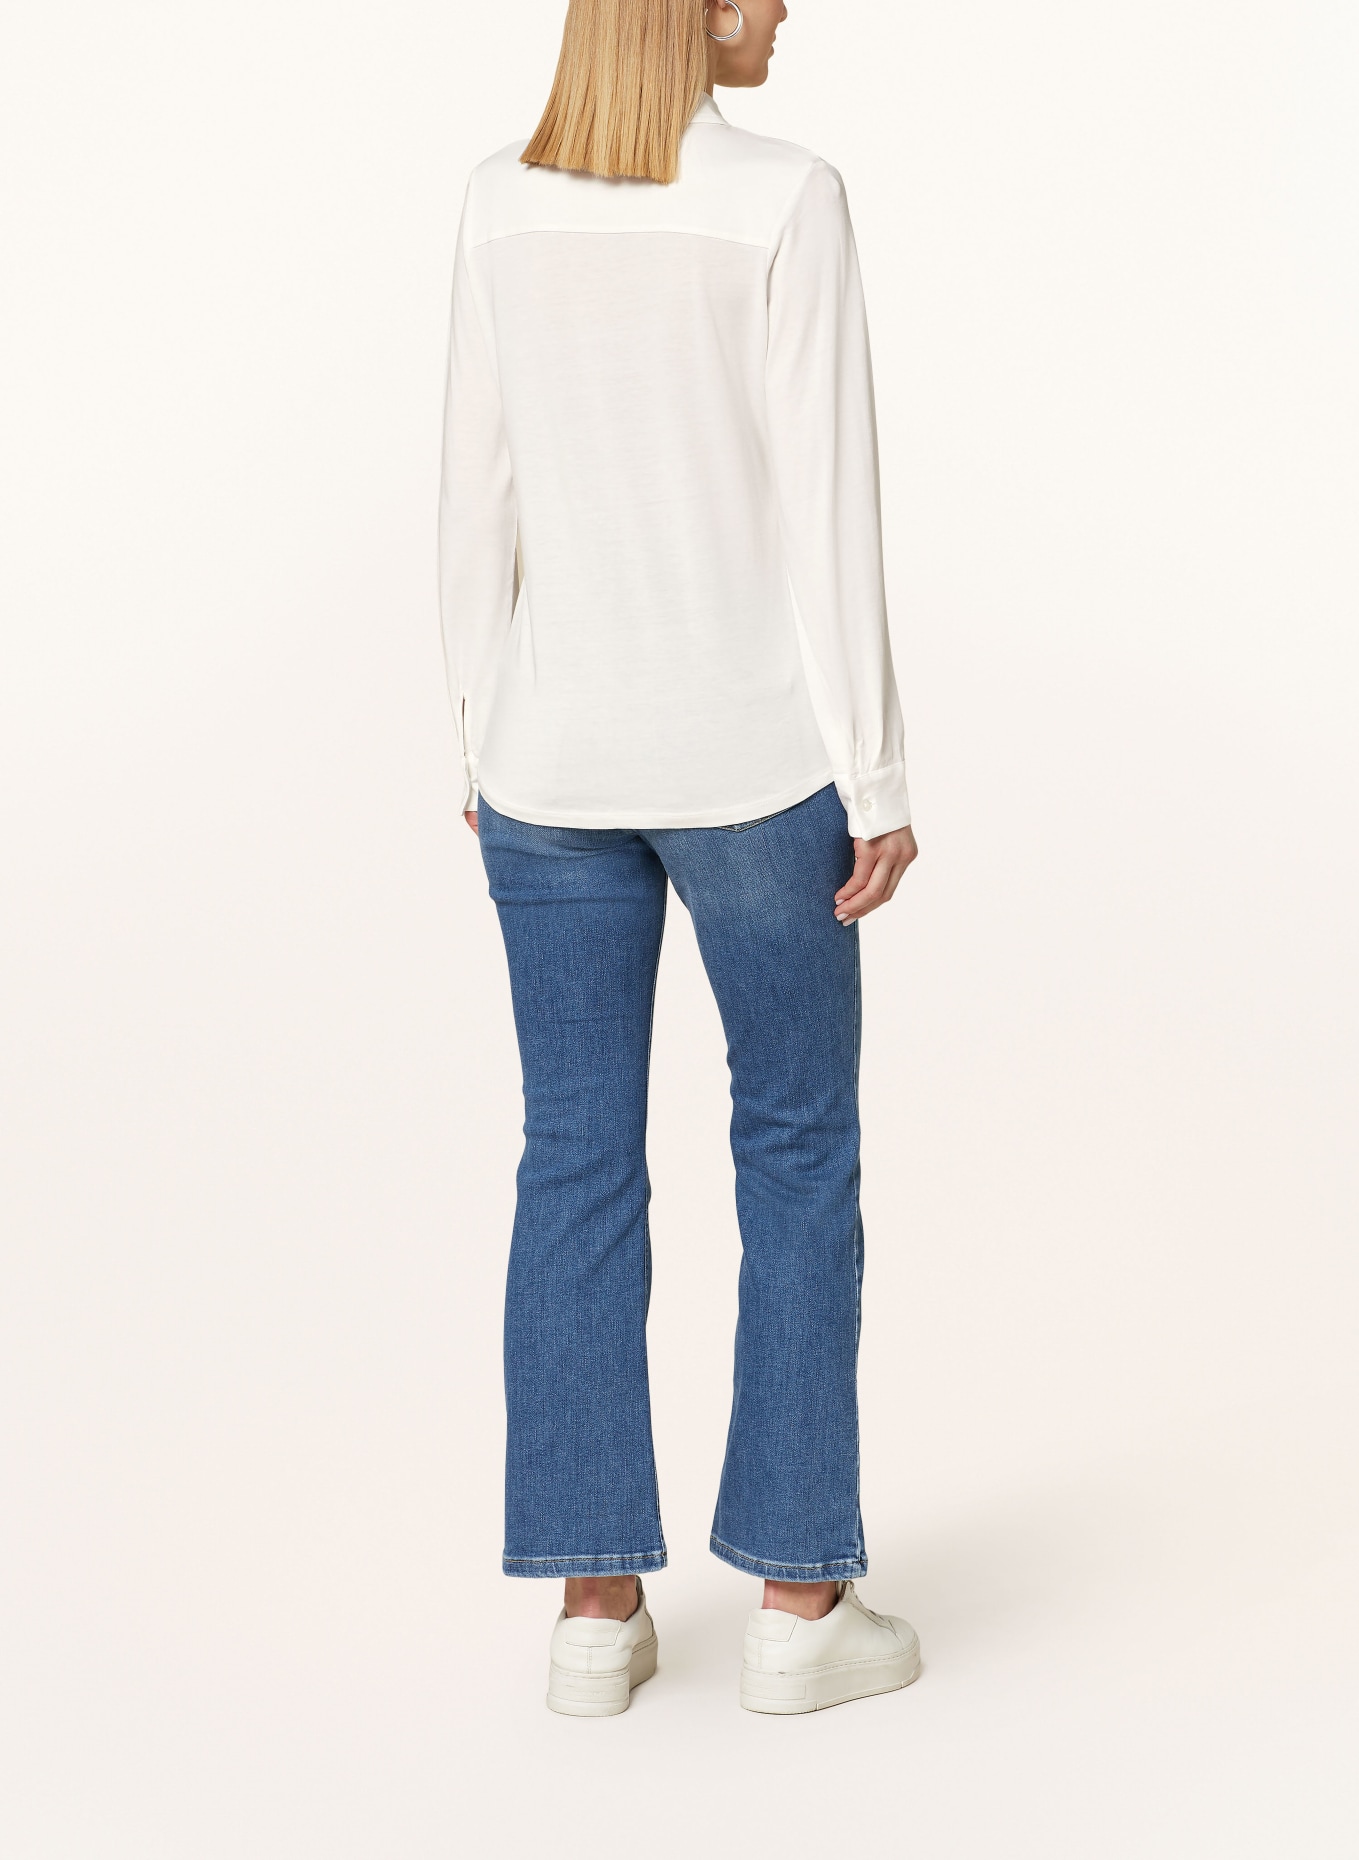 oui Shirt blouse made of jersey, Color: WHITE (Image 3)